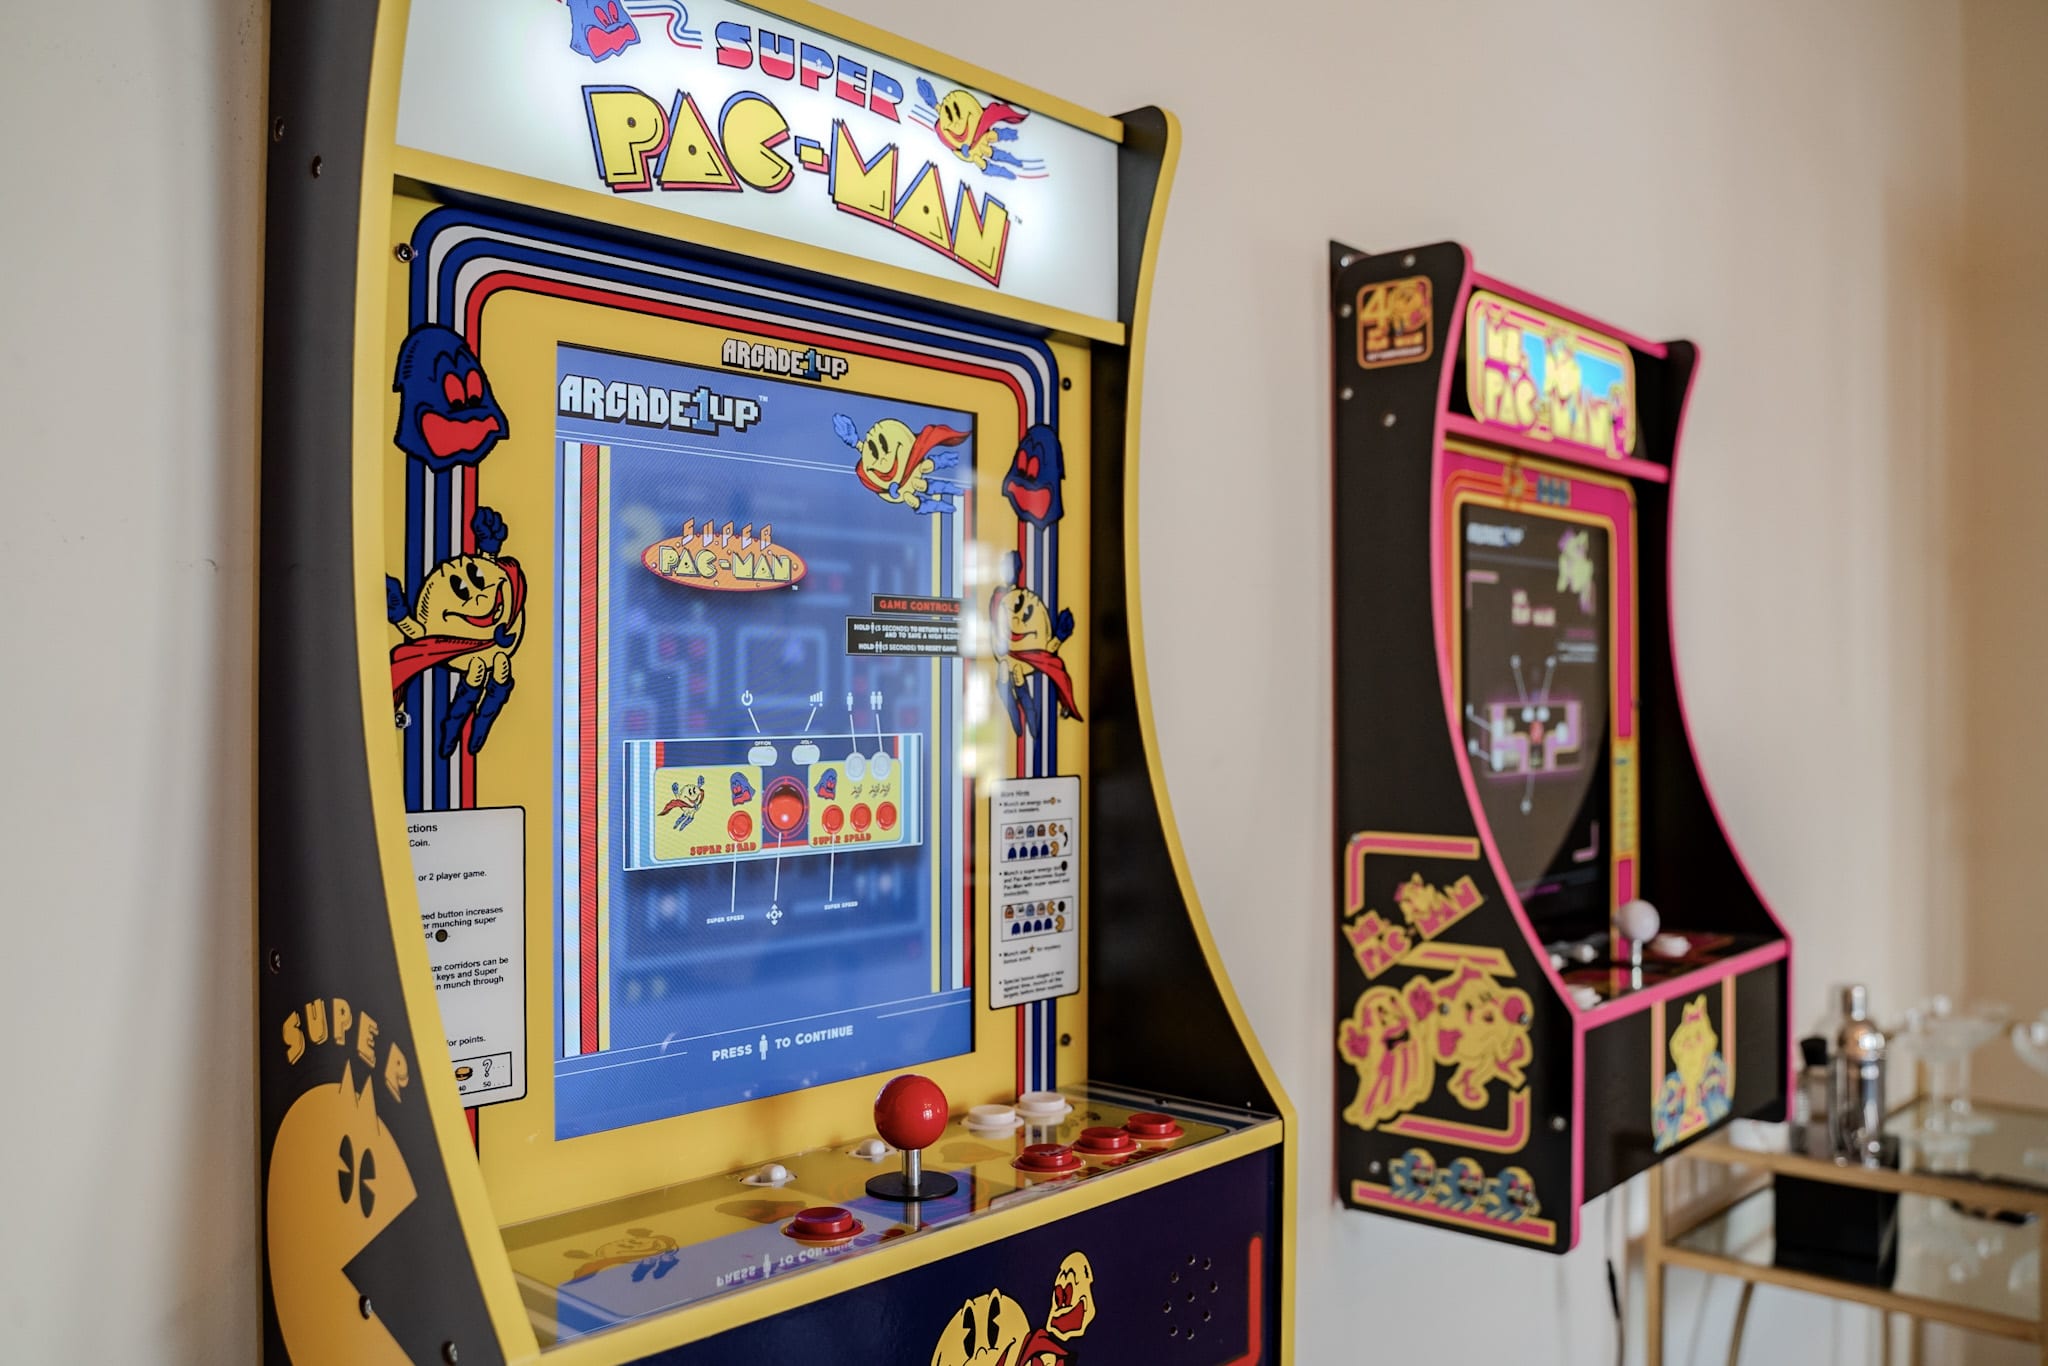 Did someone say arcade games? Super Pac Man and Miss Pac Man